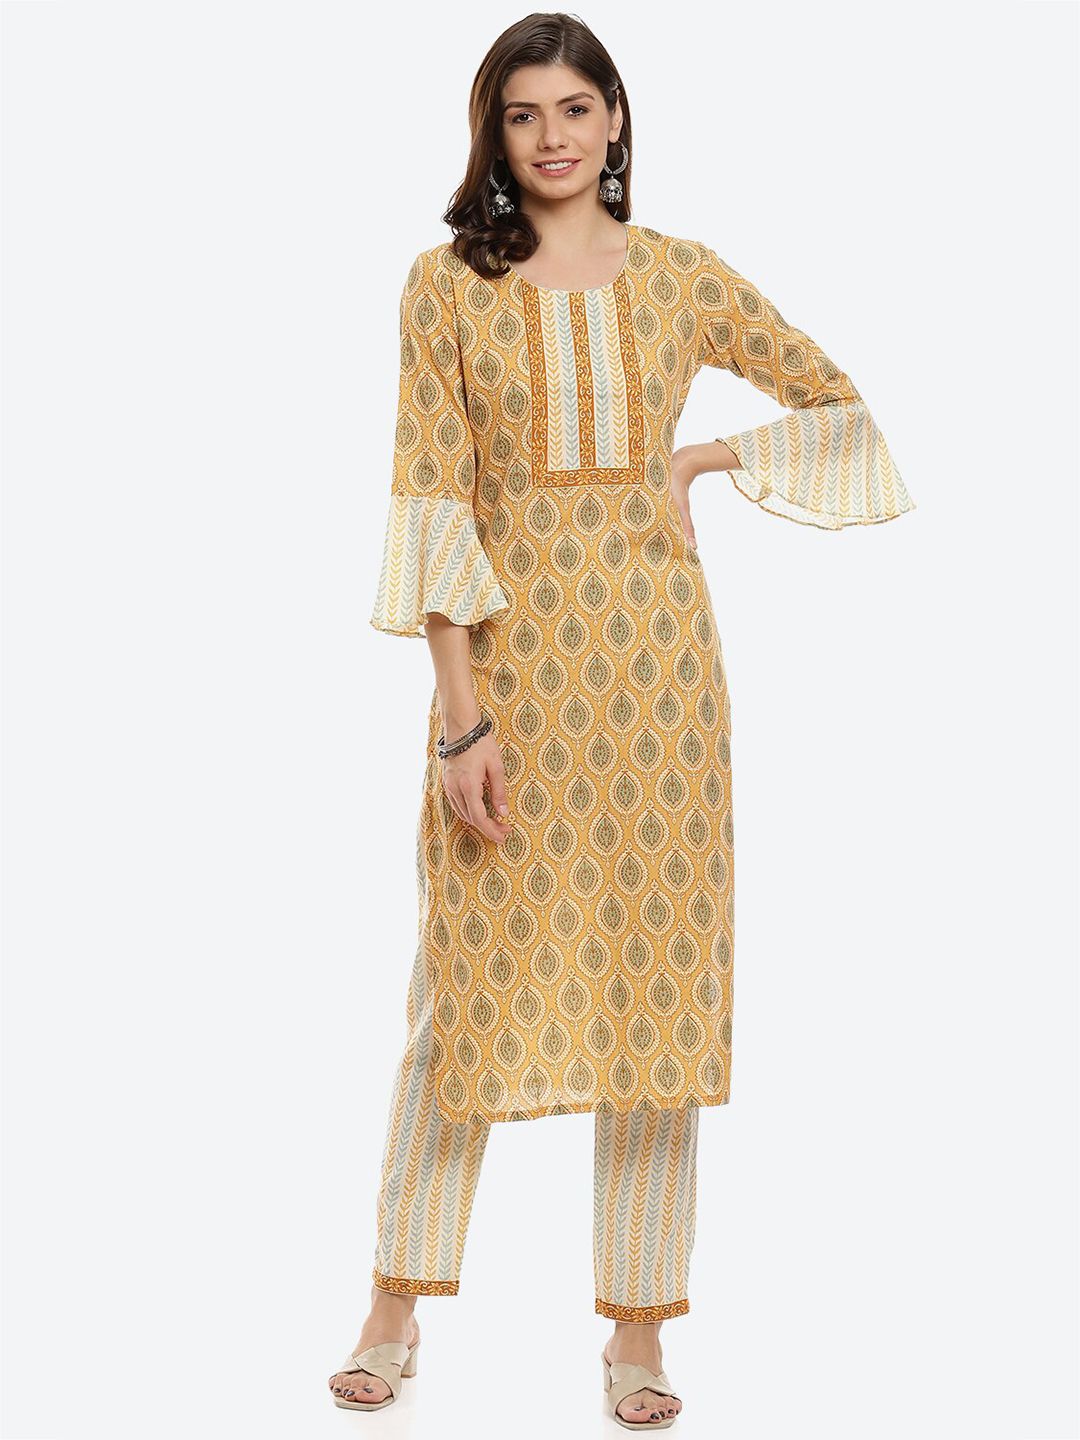 Biba Yellow & Cream-Coloured Printed Pure Cotton Unstitched Dress Material Price in India